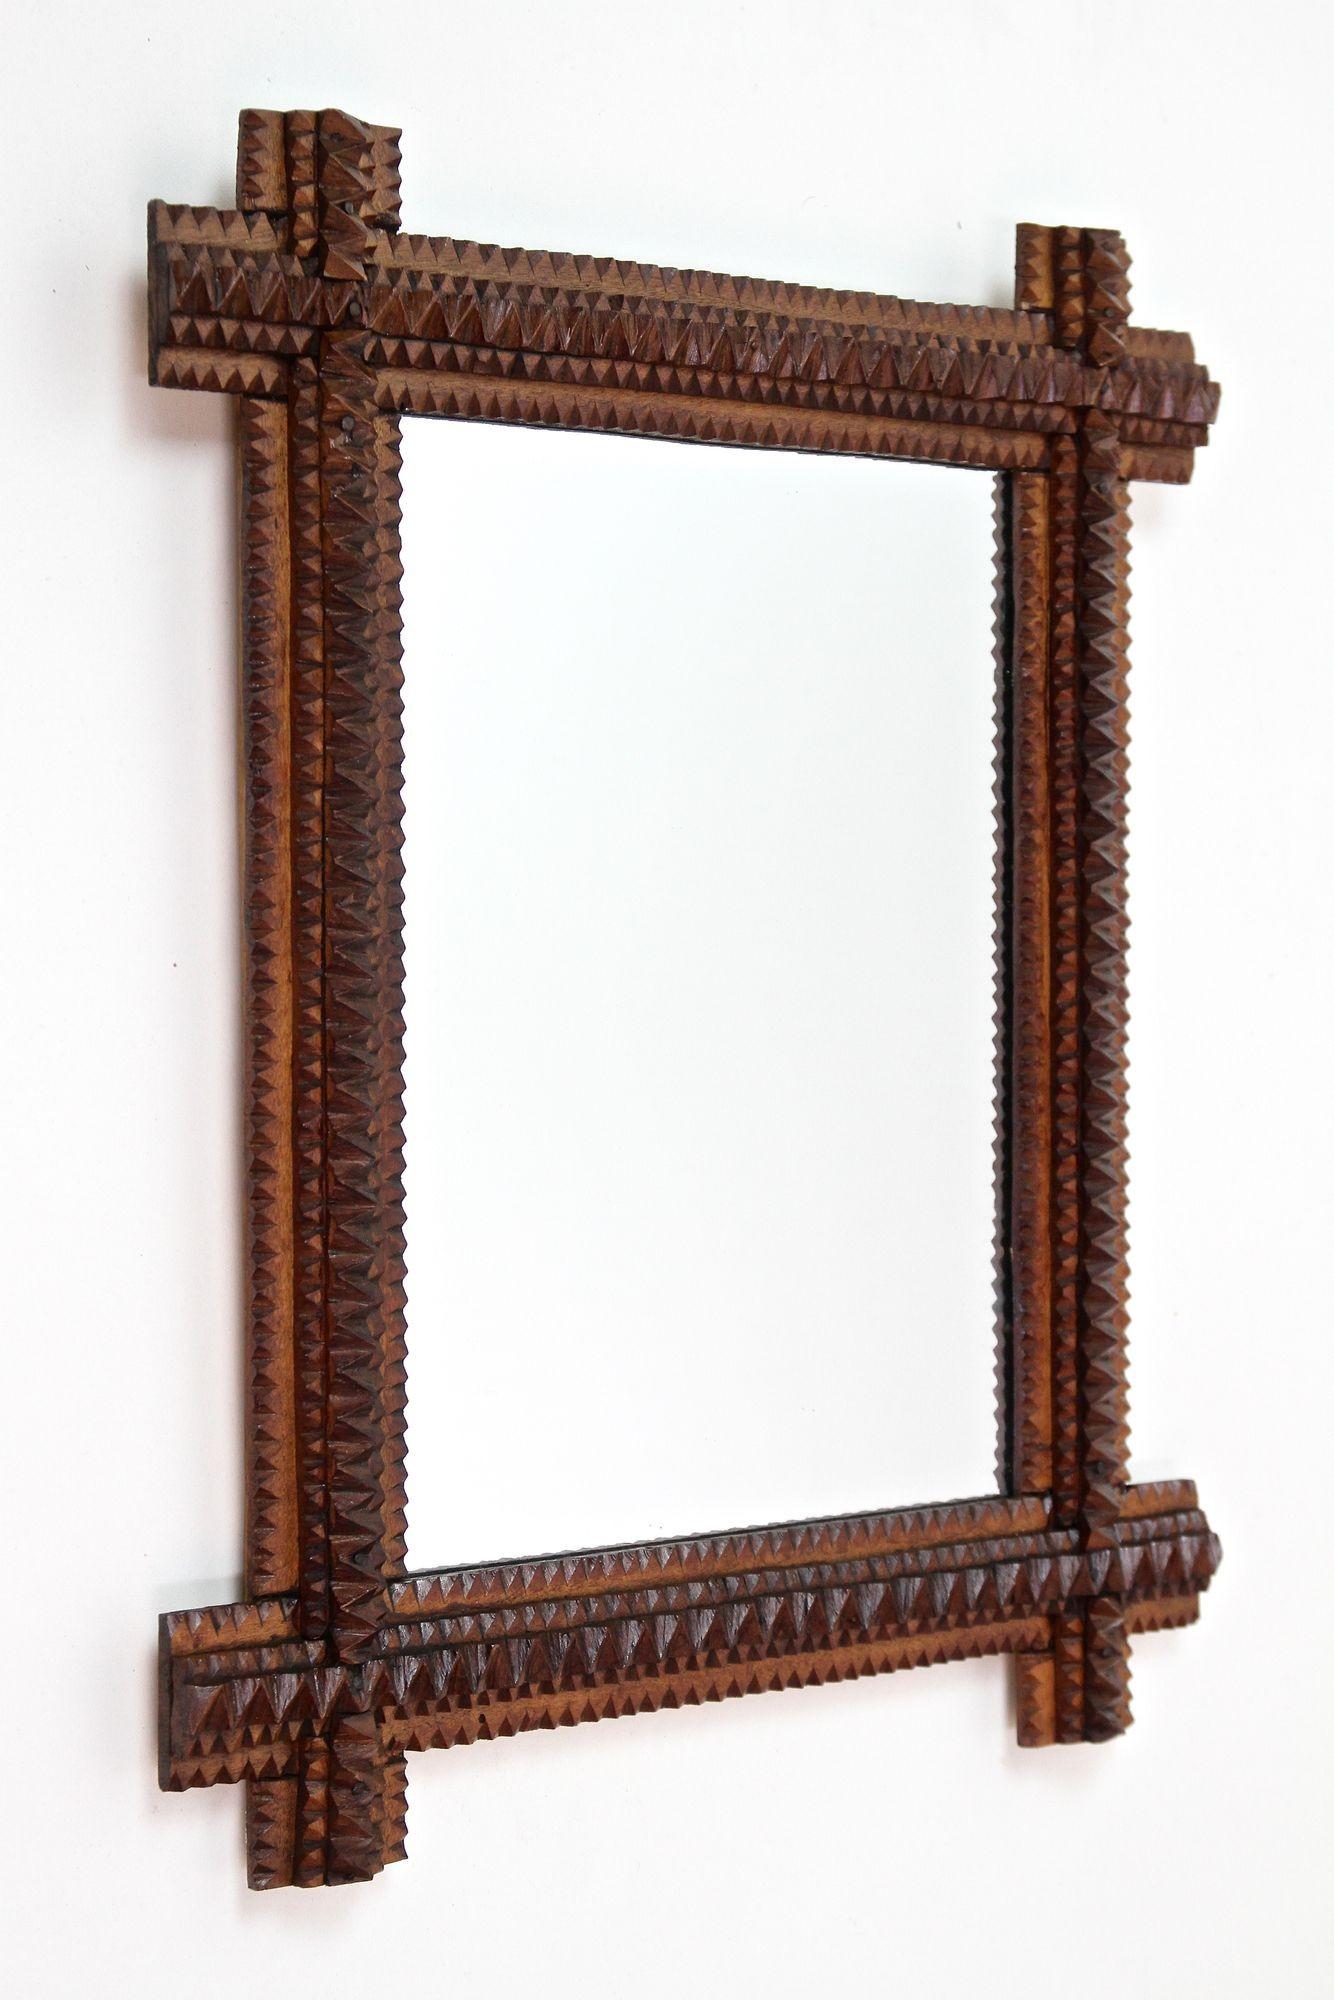 Exceptional rustic Tramp Art mirror from the period around 1880 in Austria. Elabortely hand-carved out of basswood, this lovely small wall mirror convinces with its great looking variety of different carving techniques. Slightly protruding corners